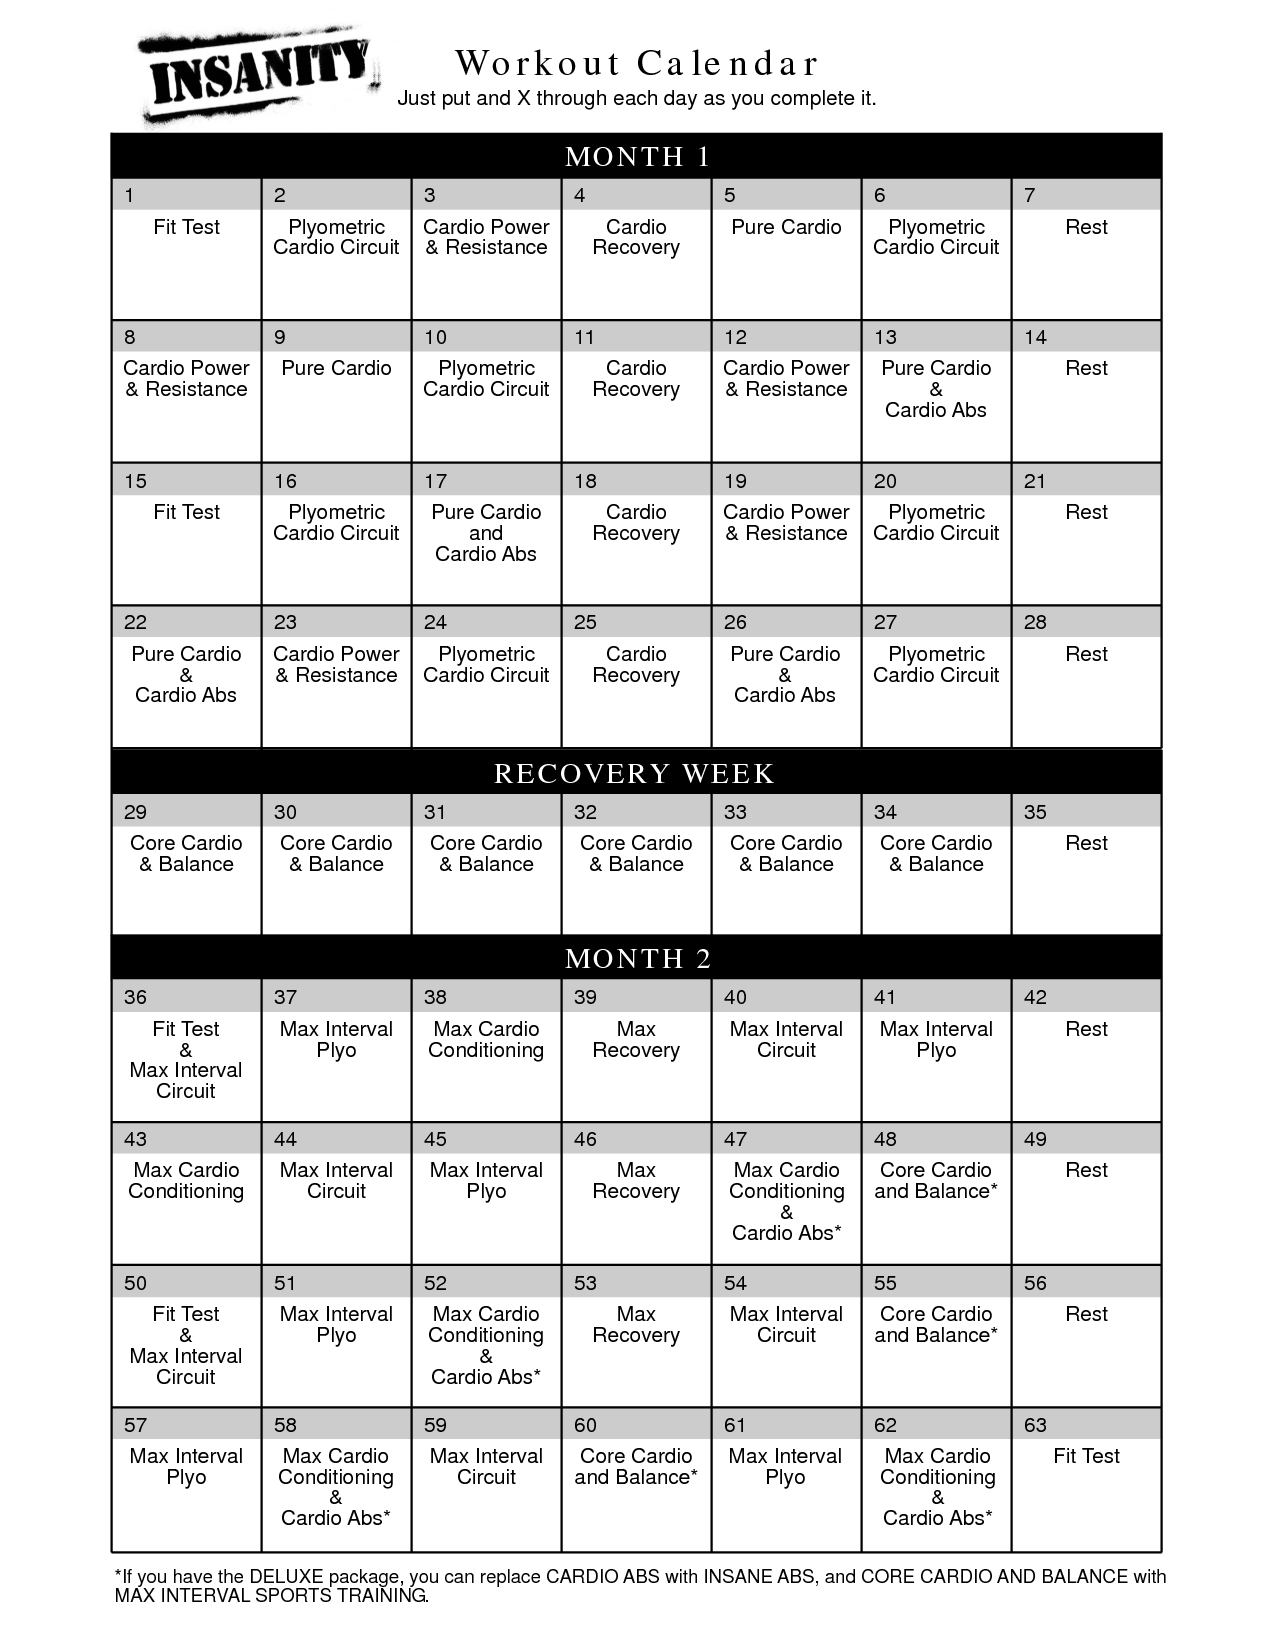 Full Body Insanity workout utorrent for Today